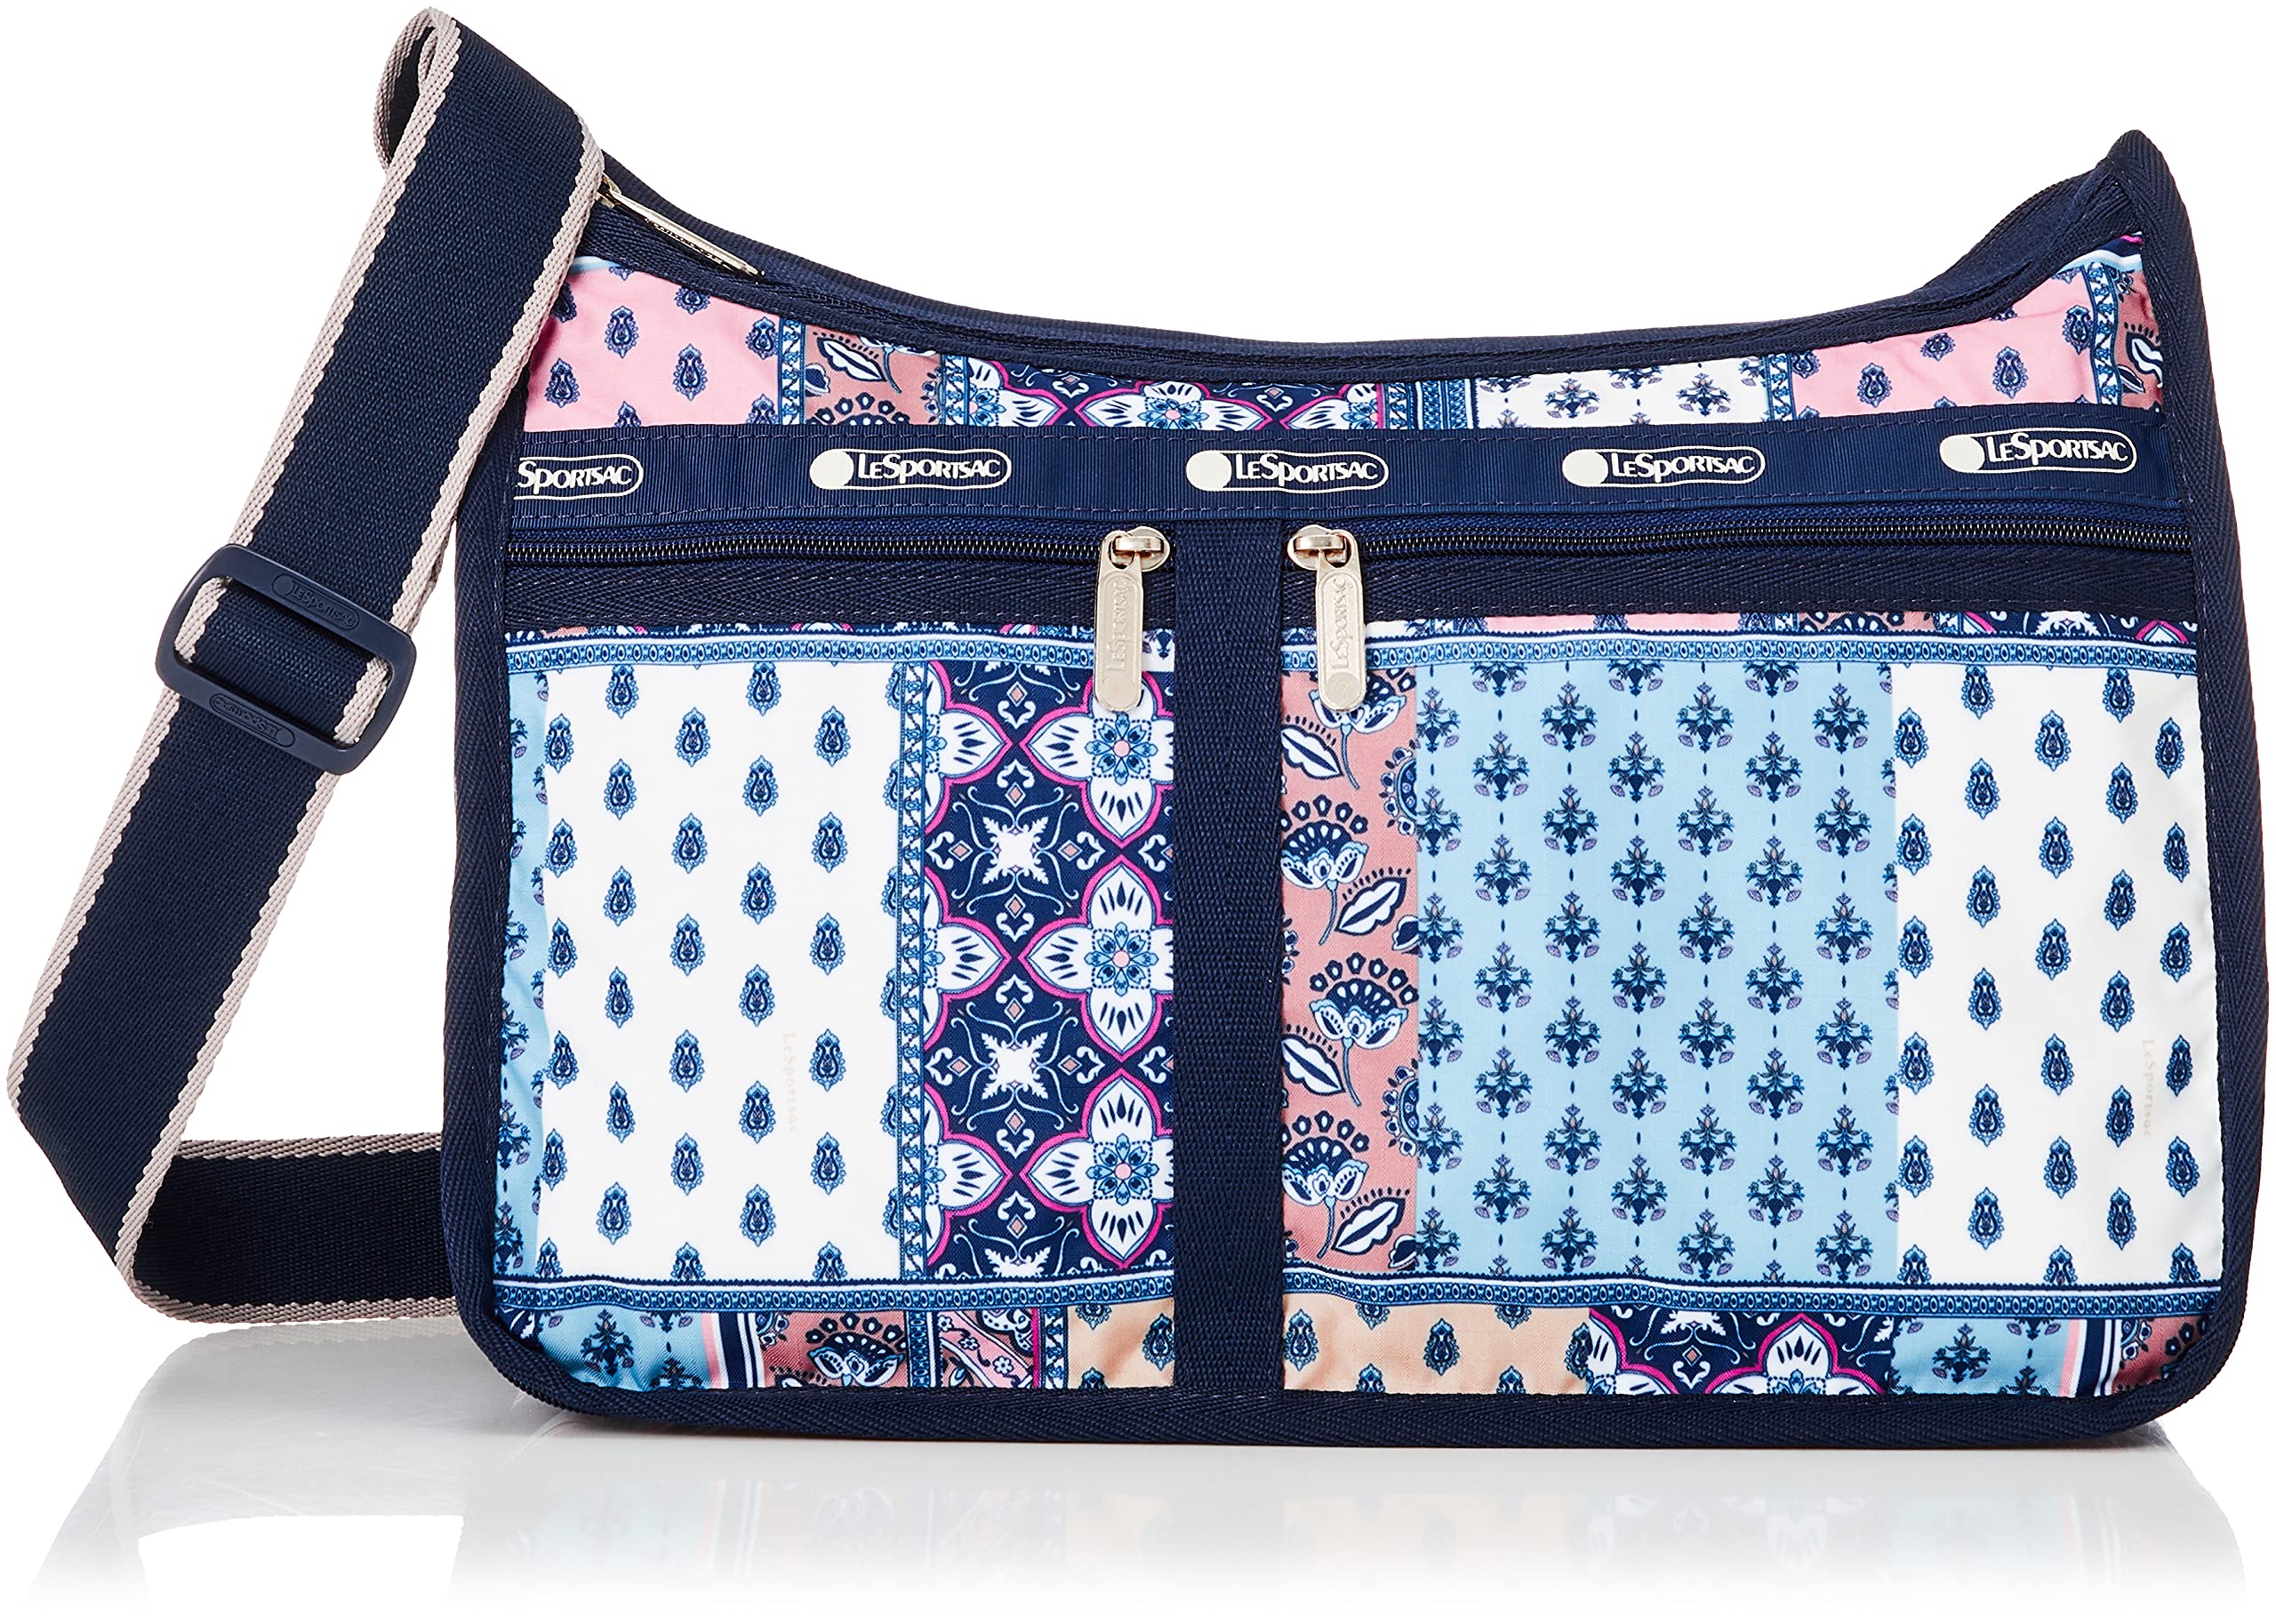 LeSportsac Azure Bliss Deluxe Everyday Crossbody Bag + Cosmetic Bag, Style 7507/Color F977, Multicolor Variegated Patchwork Style Design, Mosaic Ar...